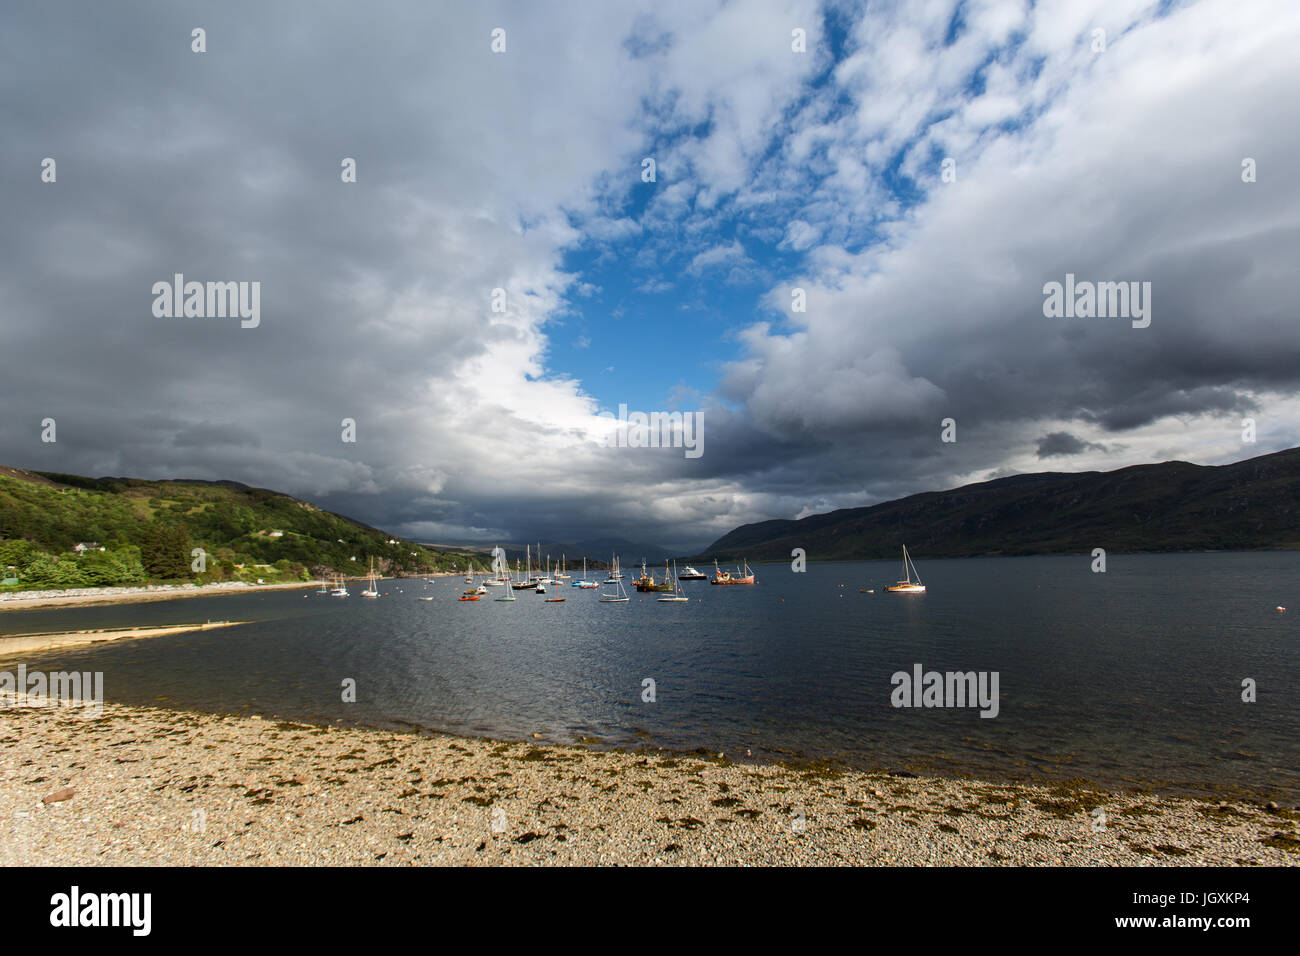 Town of Ullapool, Scotland. Picturesque view of sail and power boats moored in Loch Broom. Stock Photo